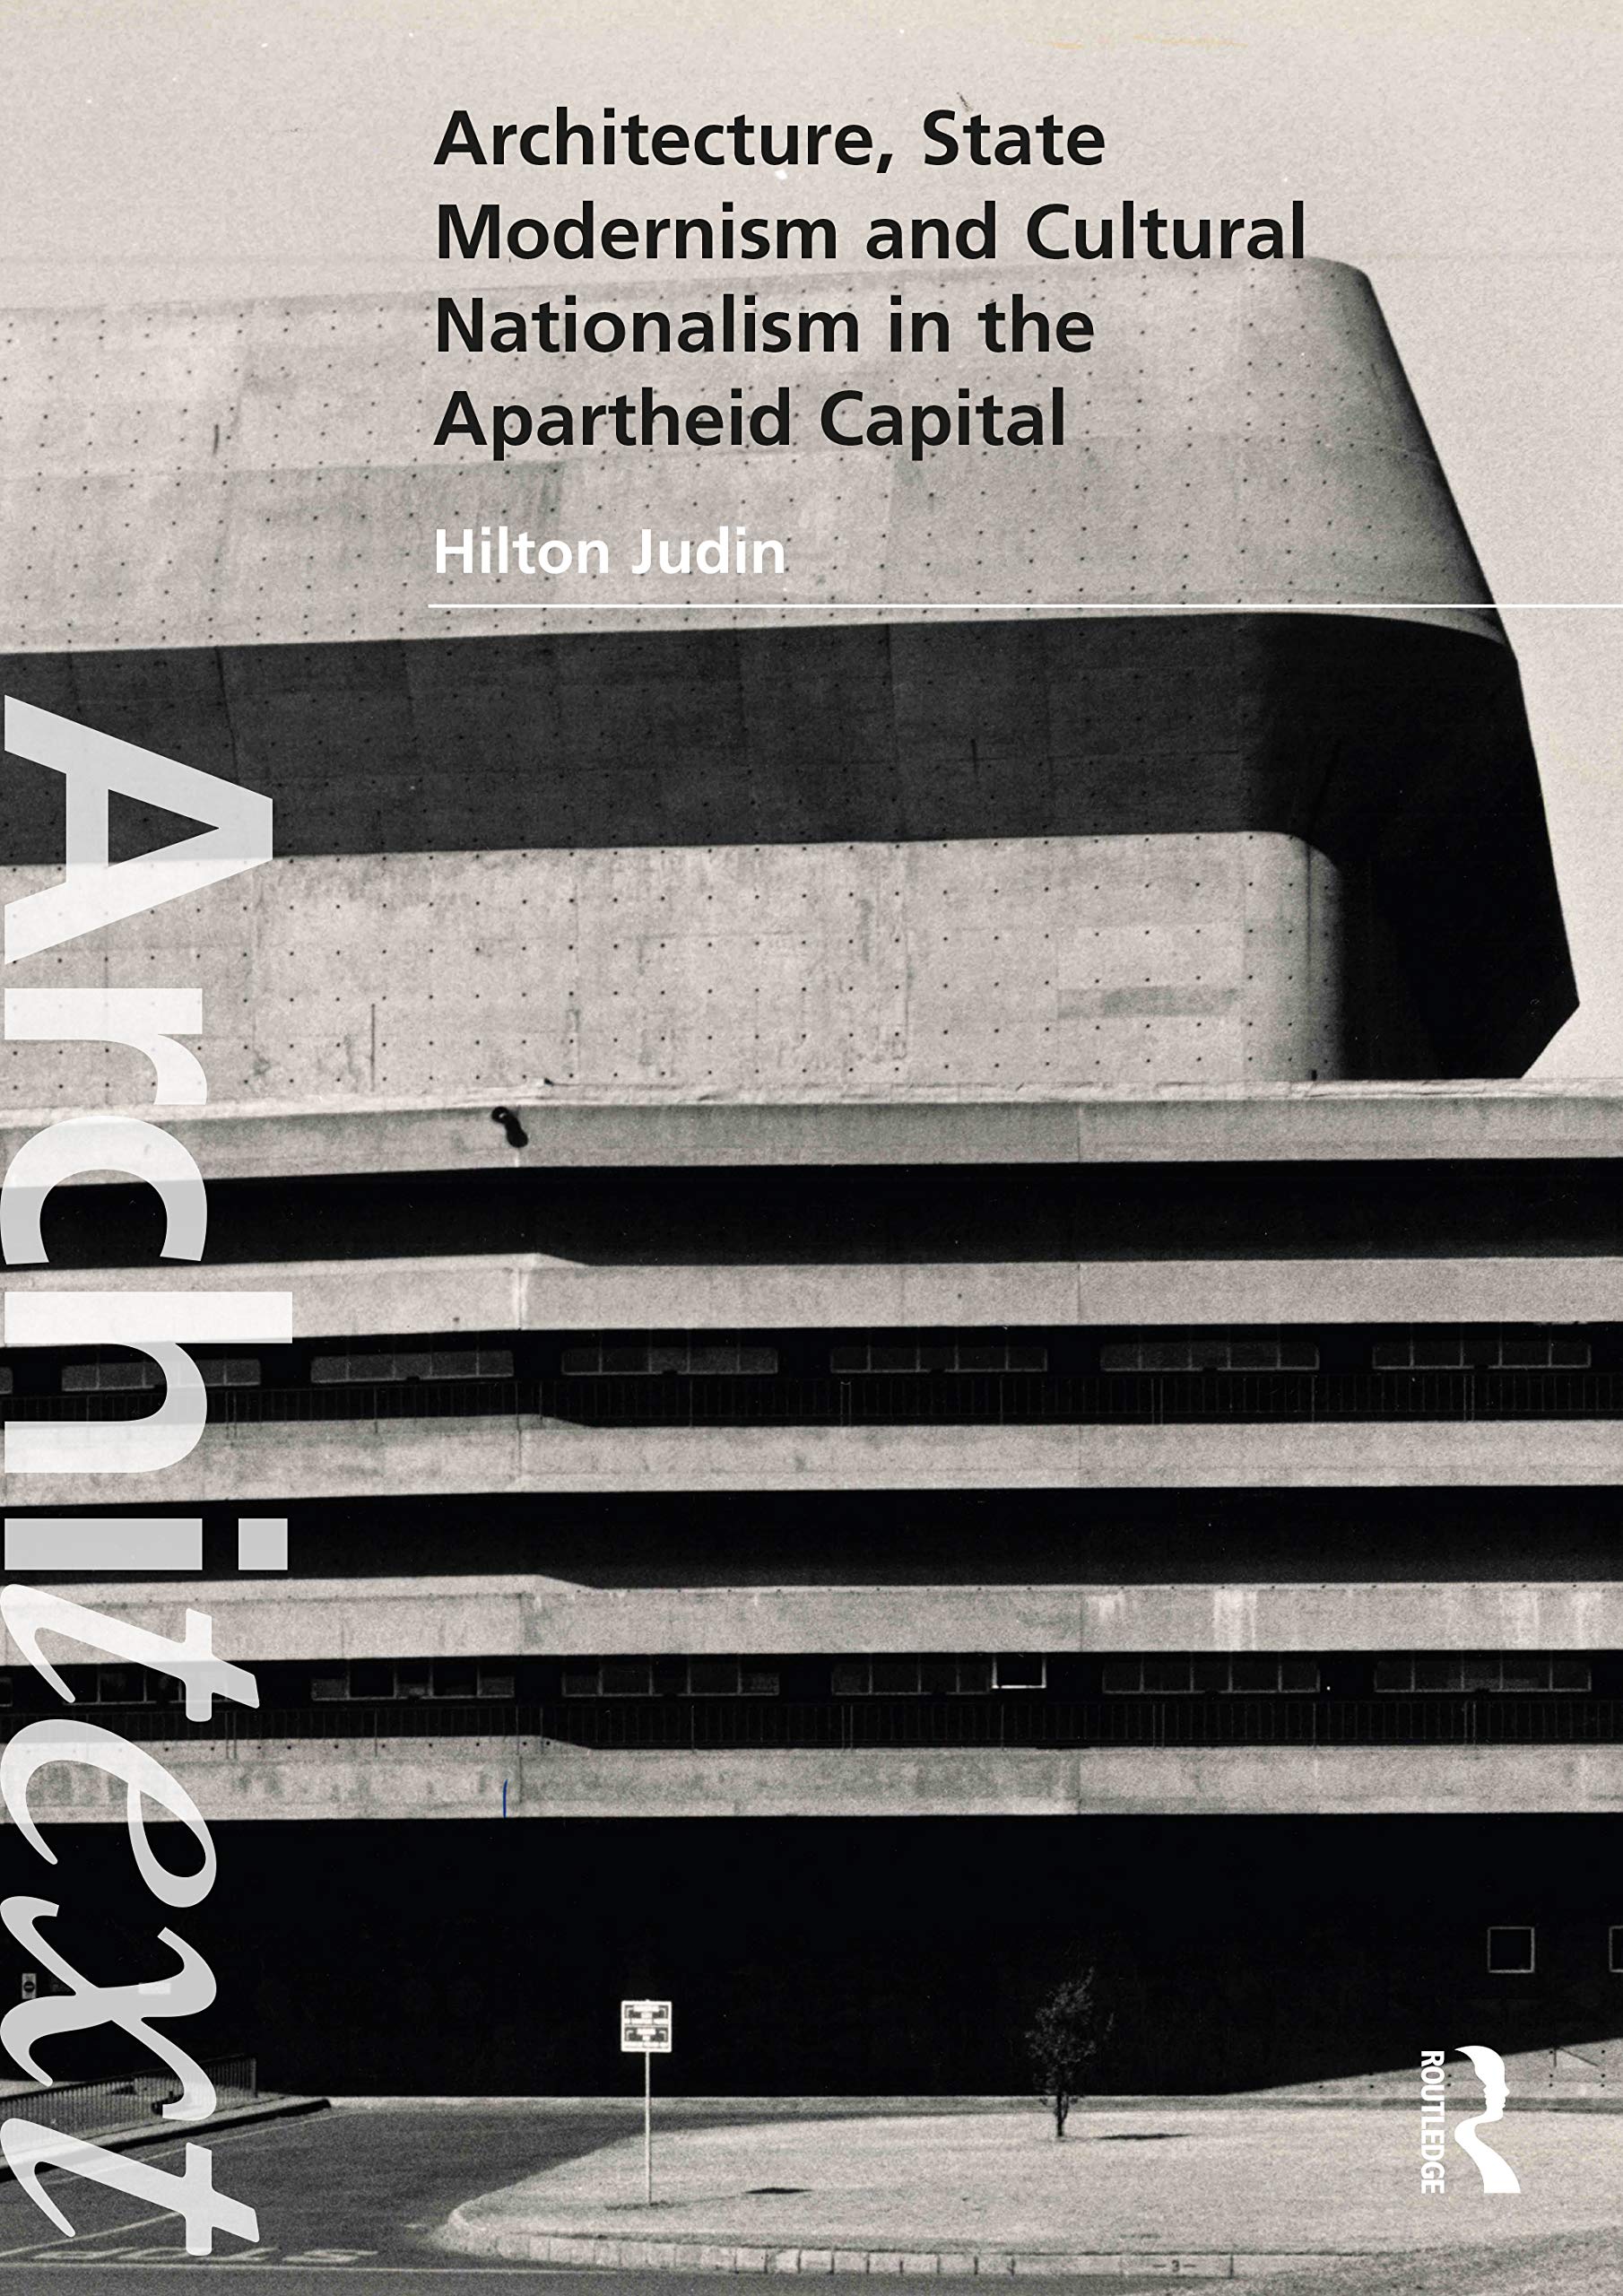 How International Style Modernism Came to Dominate in Apartheid Architecture in 1960s South Africa